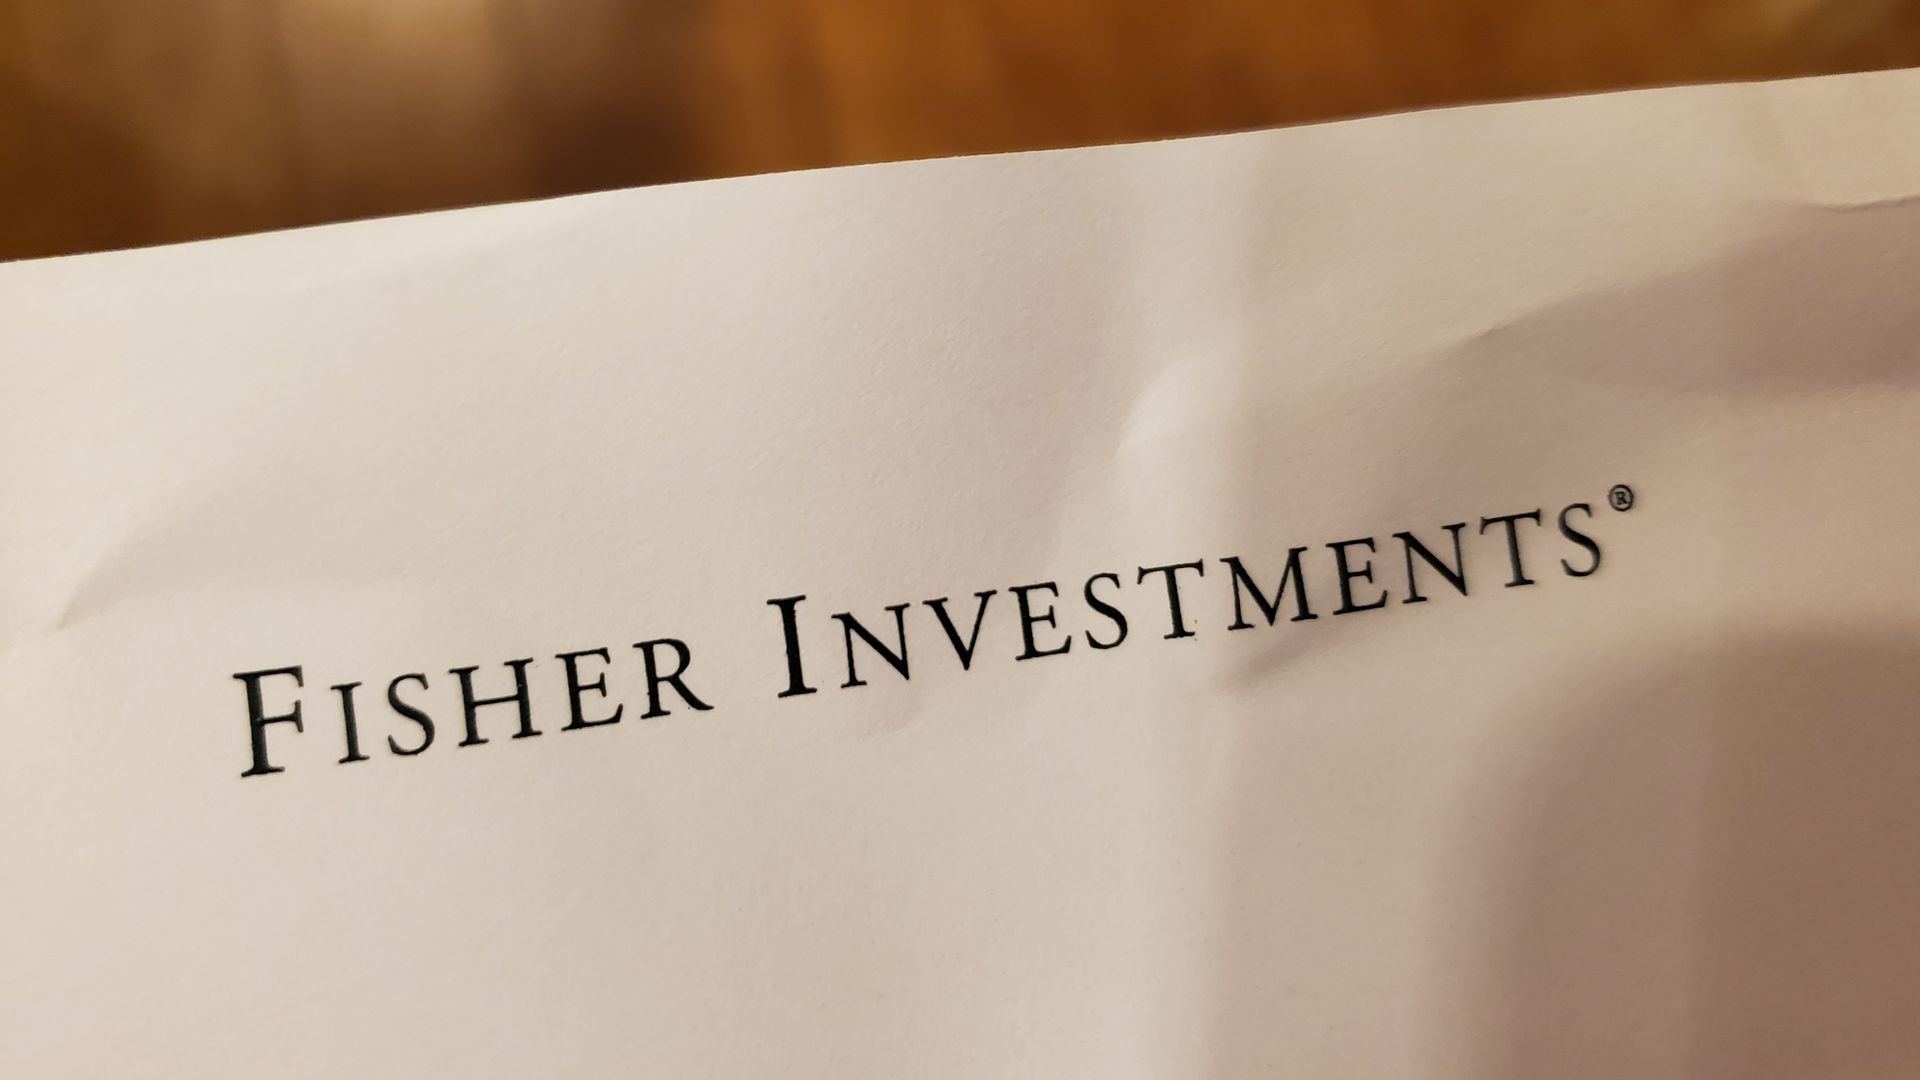 Close-up of logo for financial management company Fisher Investments on paper on light wooden background.